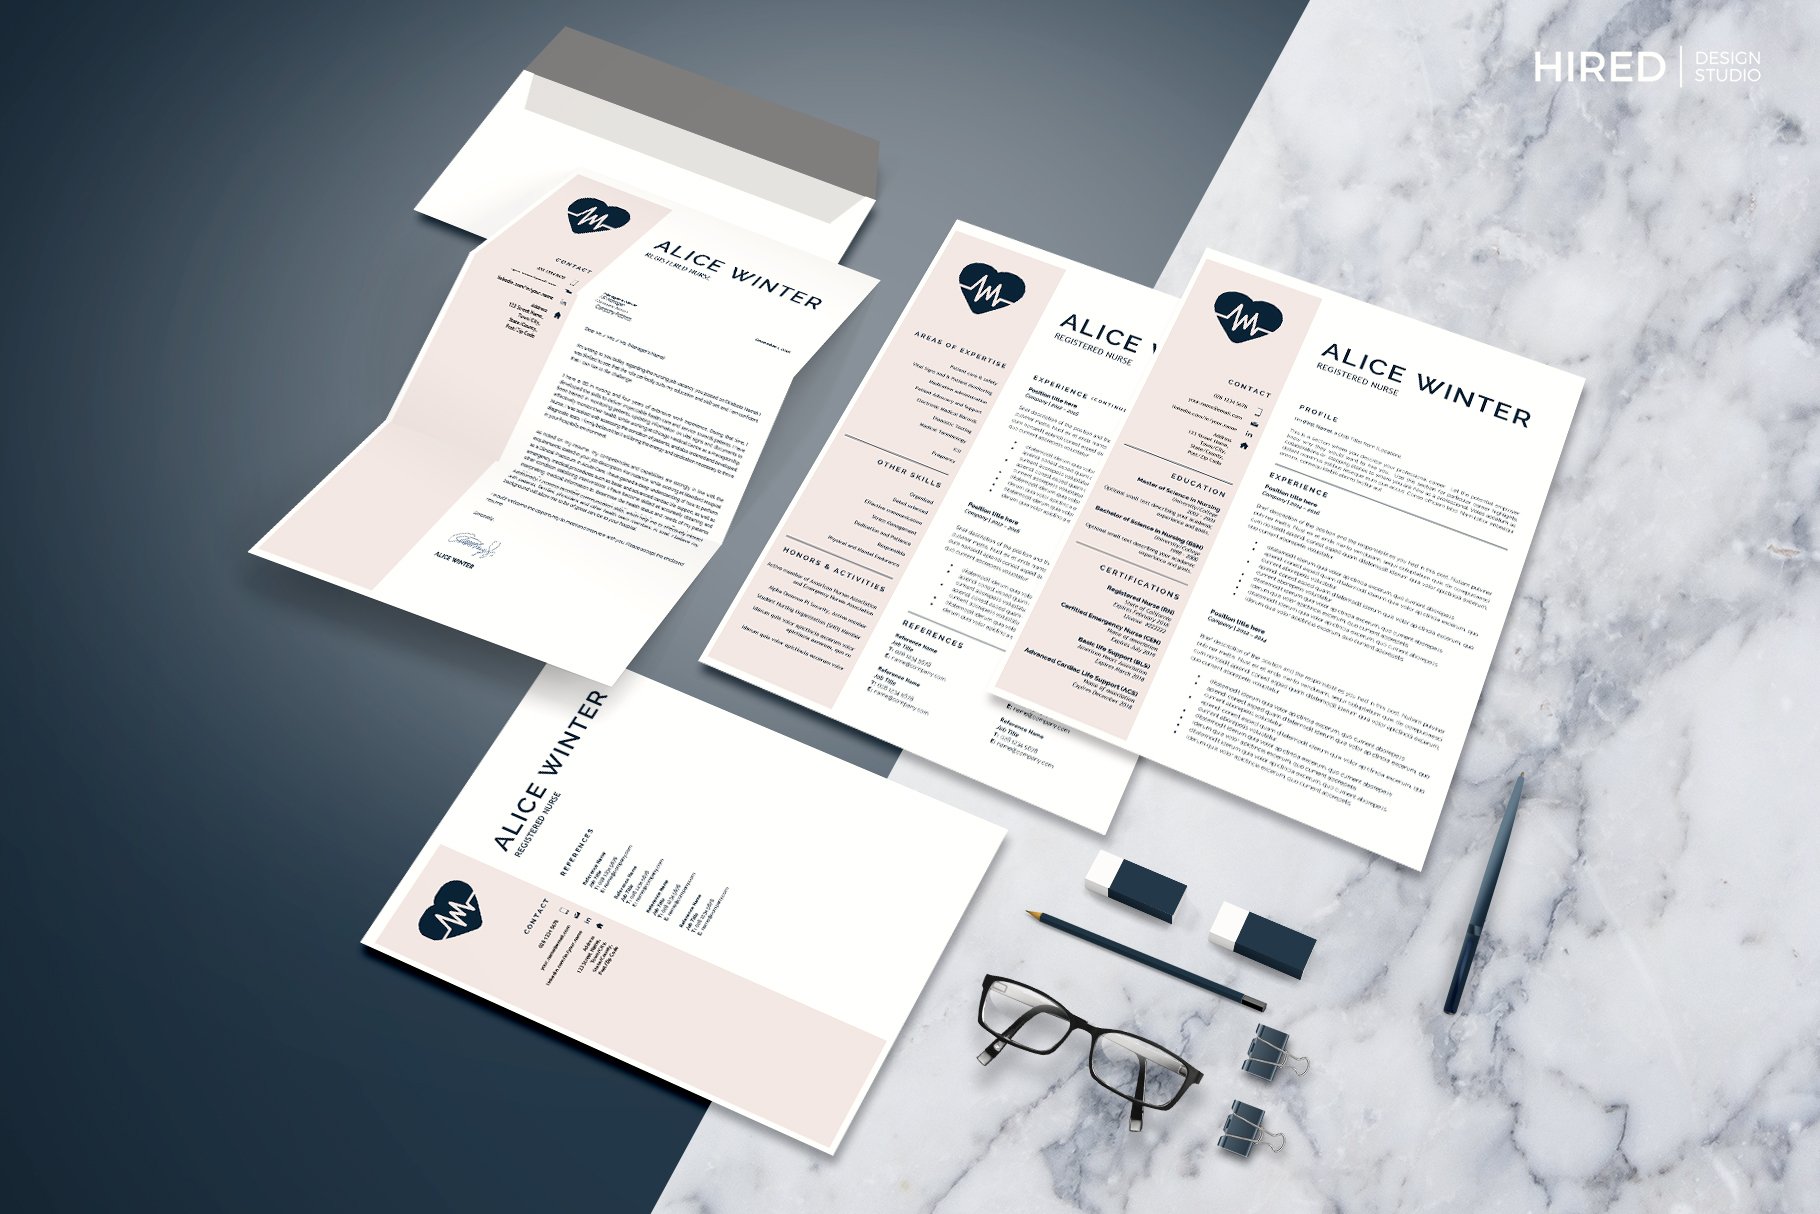 Set of three different types of resumes.